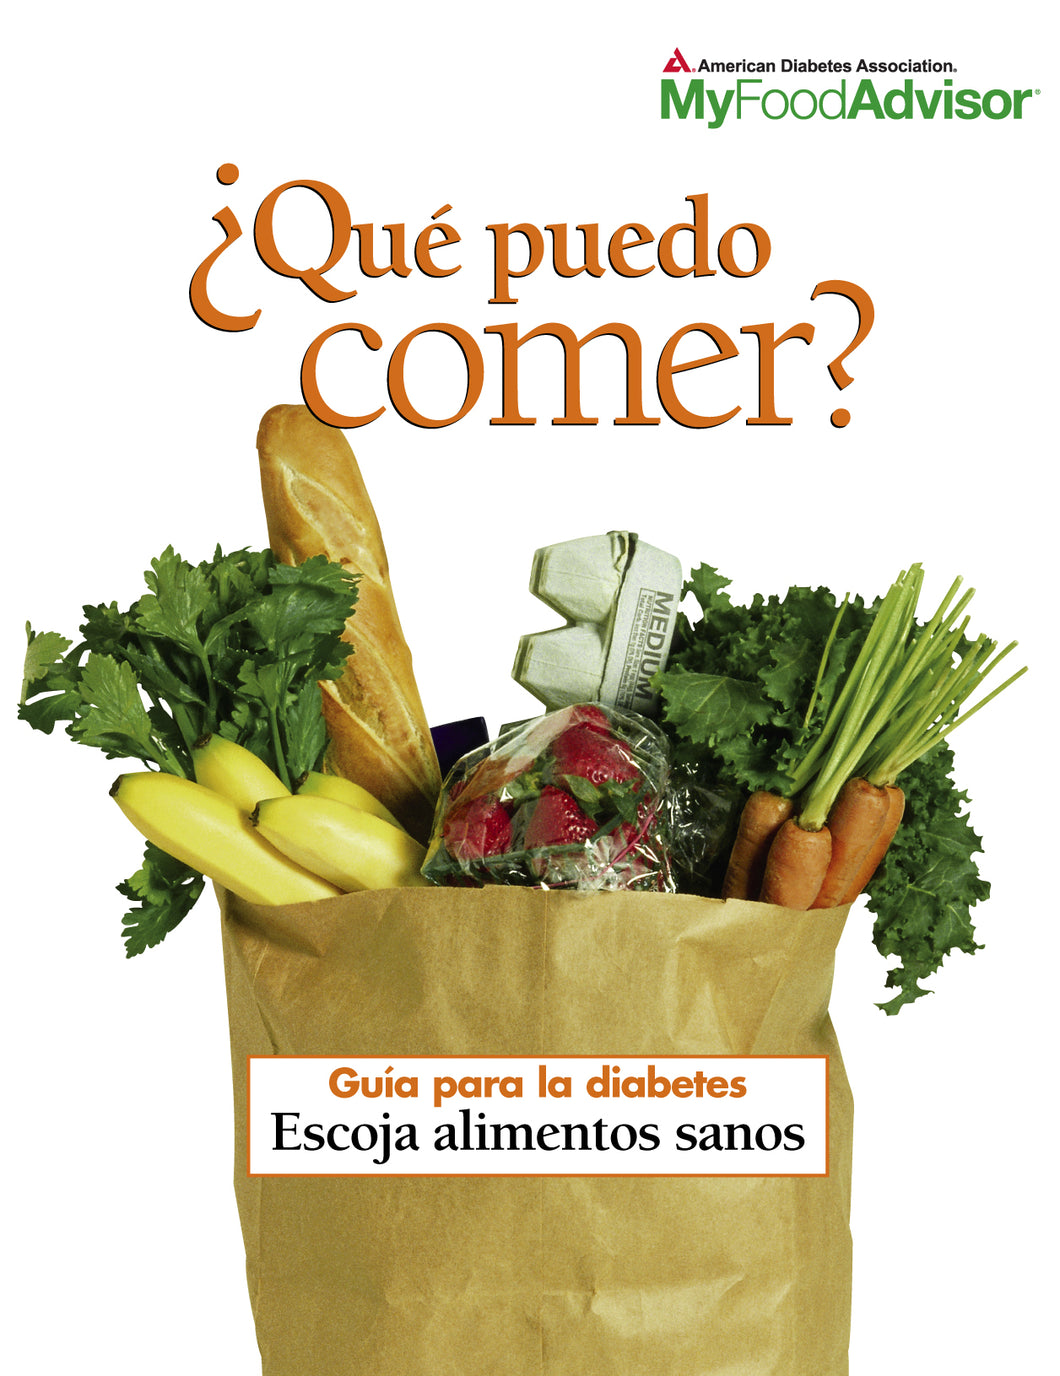 What Can I Eat? The Diabetes Guide to Healthy Food Choices Booklet, 2014 Edition (Spanish) (25/Pkg)